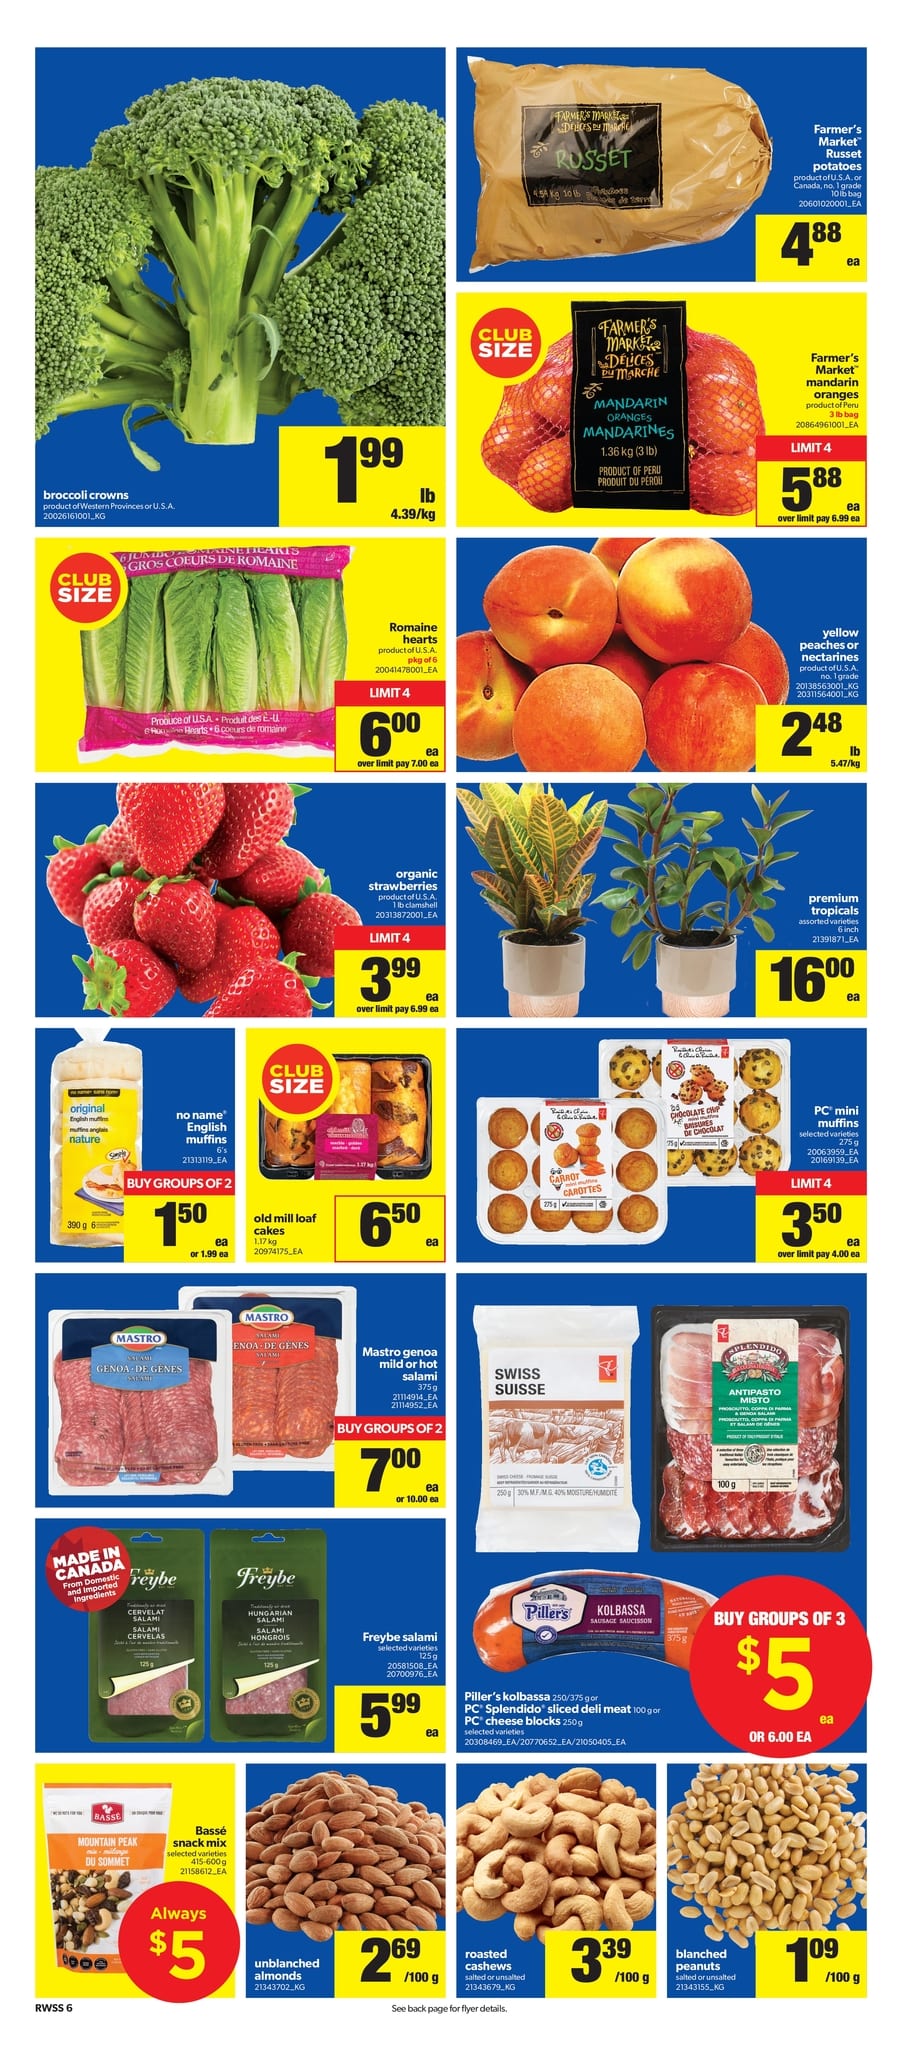 Real Canadian Superstore Western Canada - Weekly Flyer Specials - Page 7